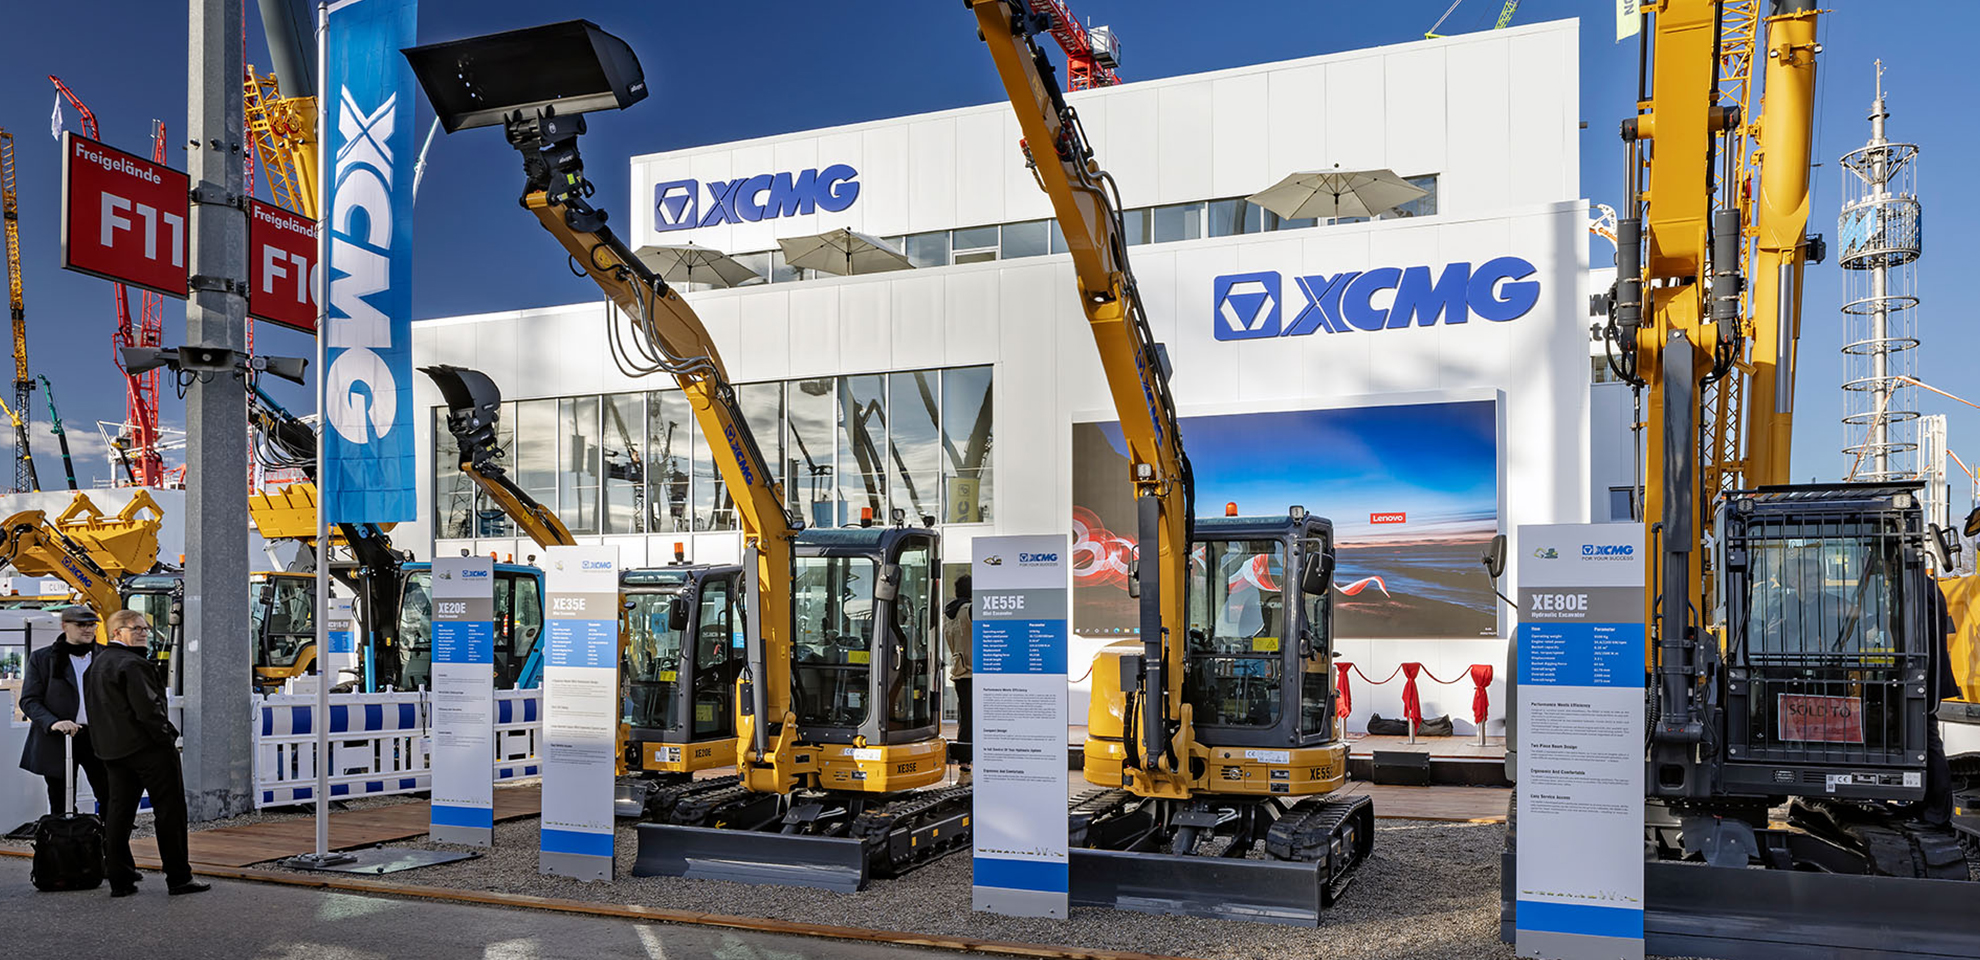 Exhibition stand builder Display International is building the stand at Bauma 2022 in Munich for Asian company XCMG.